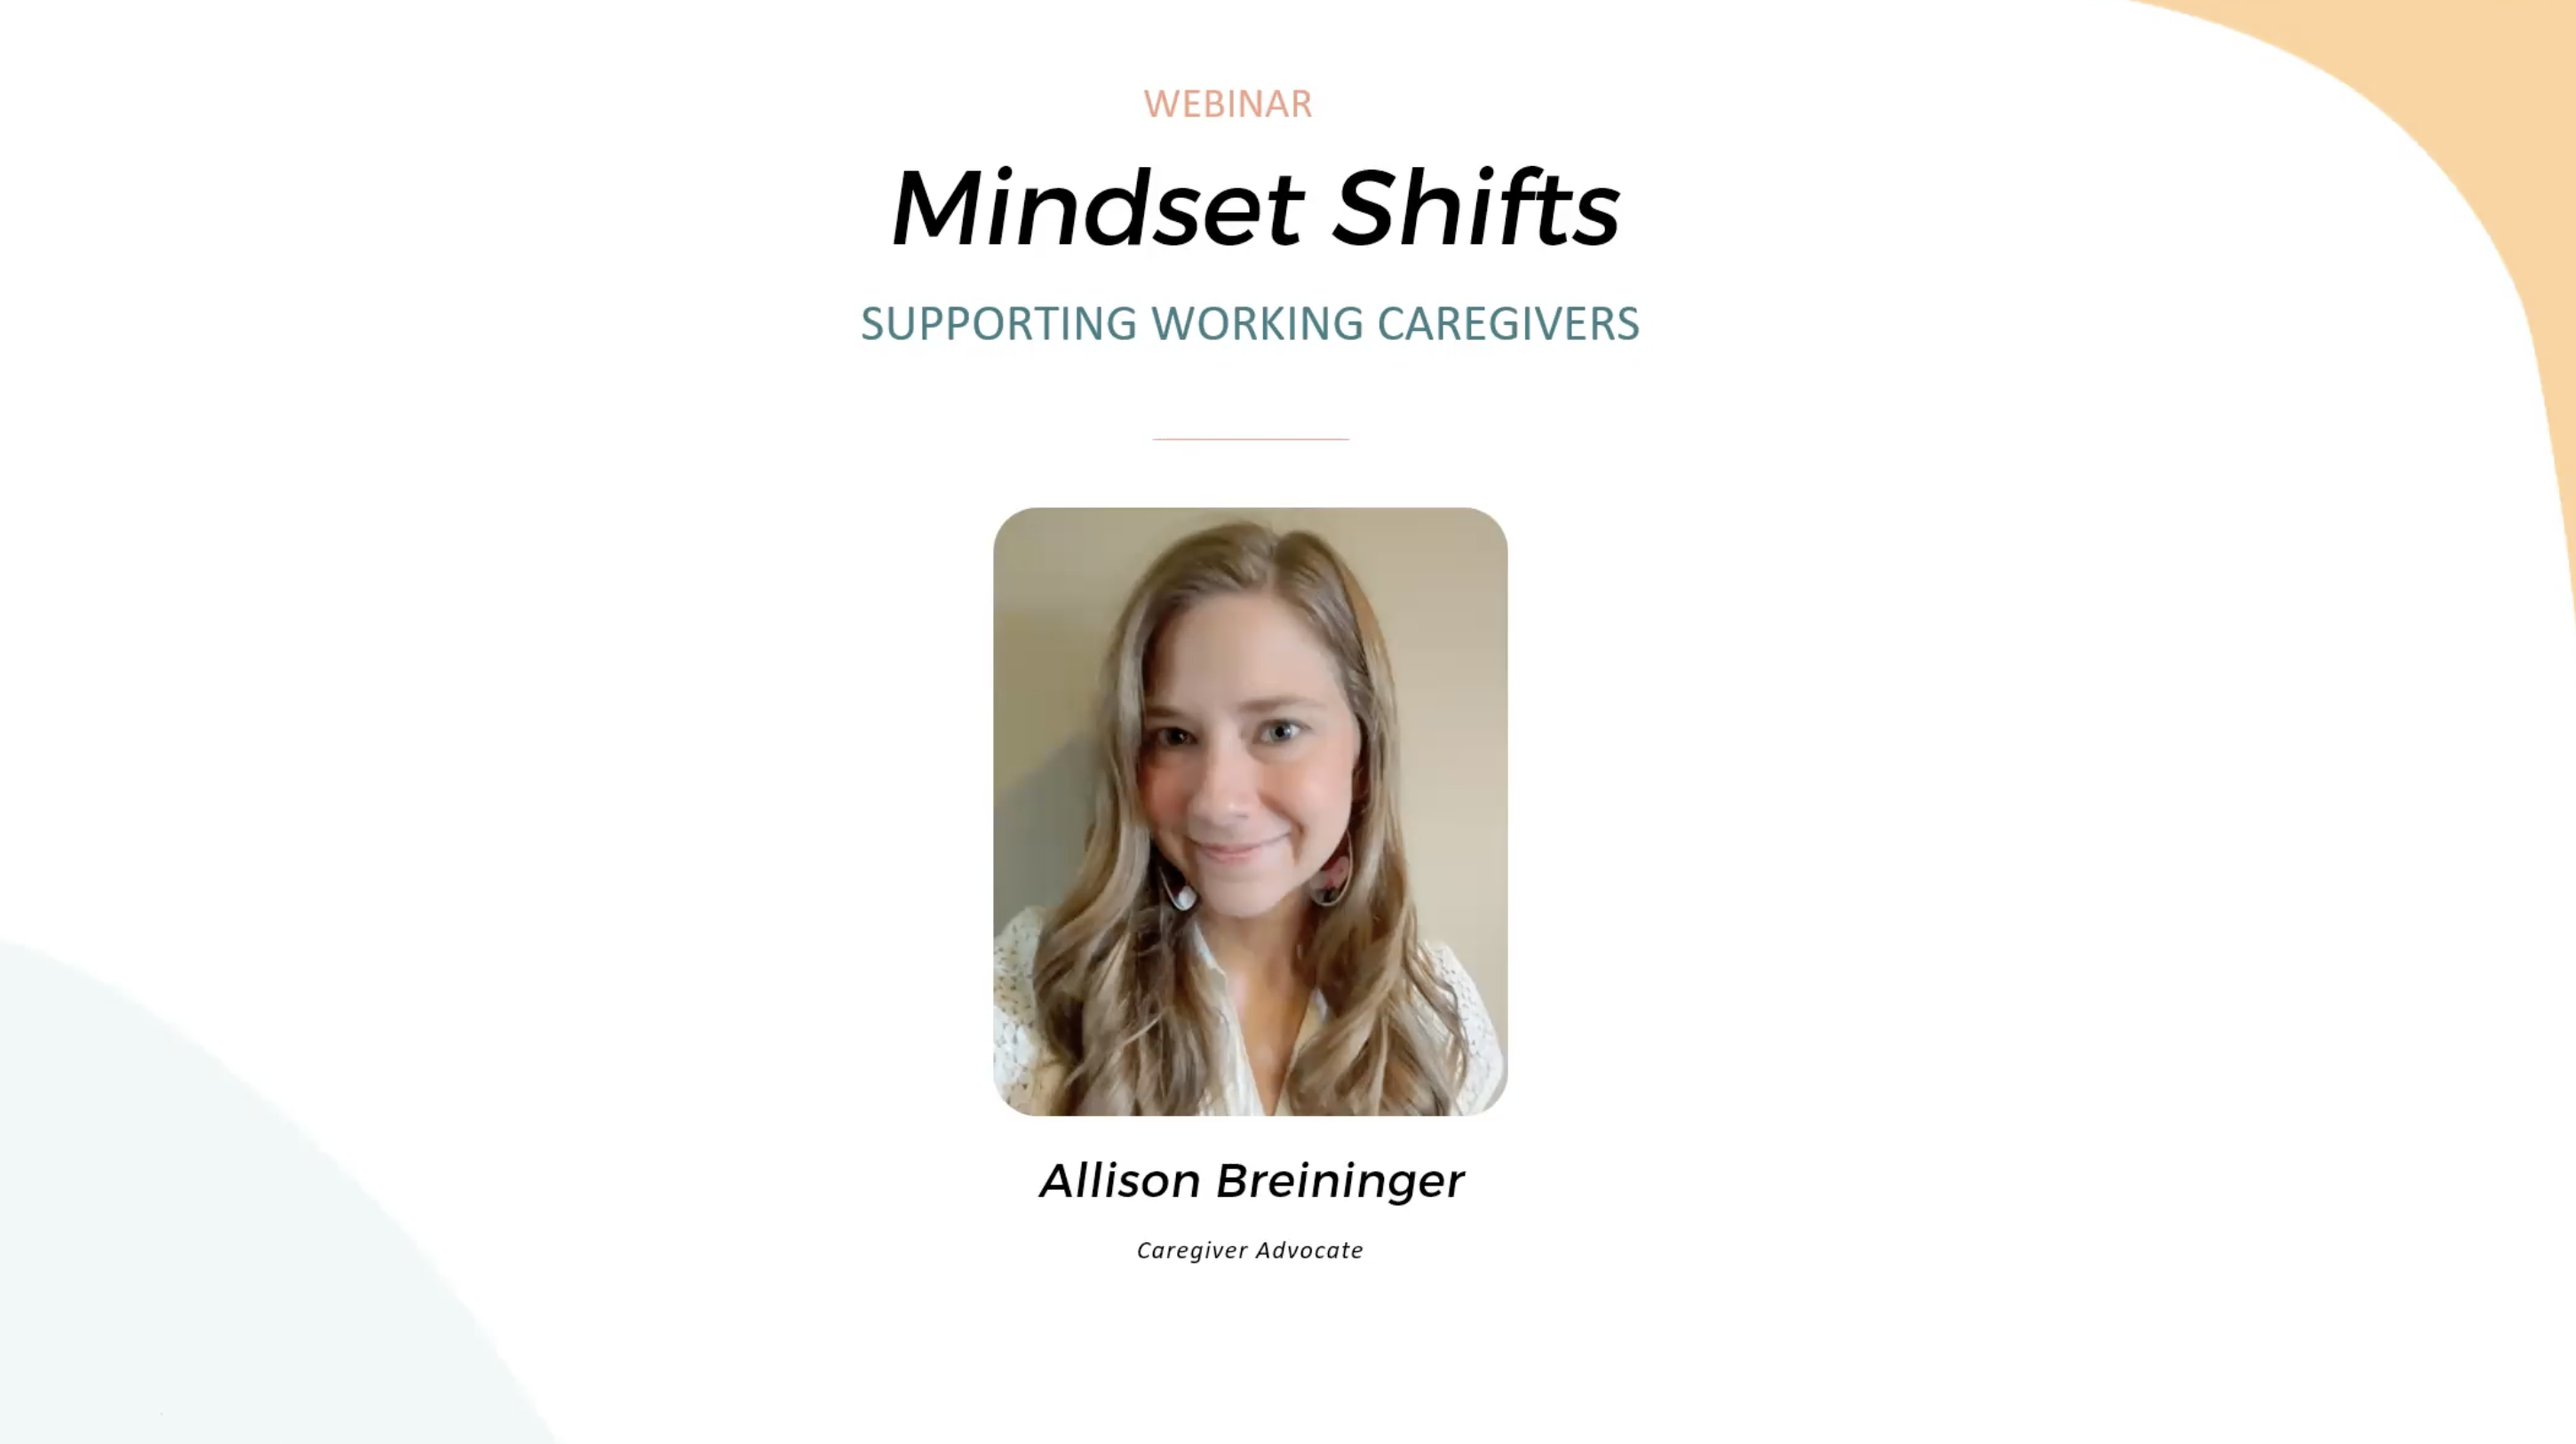 Watch: Mindset Shifts to Balance Work & Care in the New Year